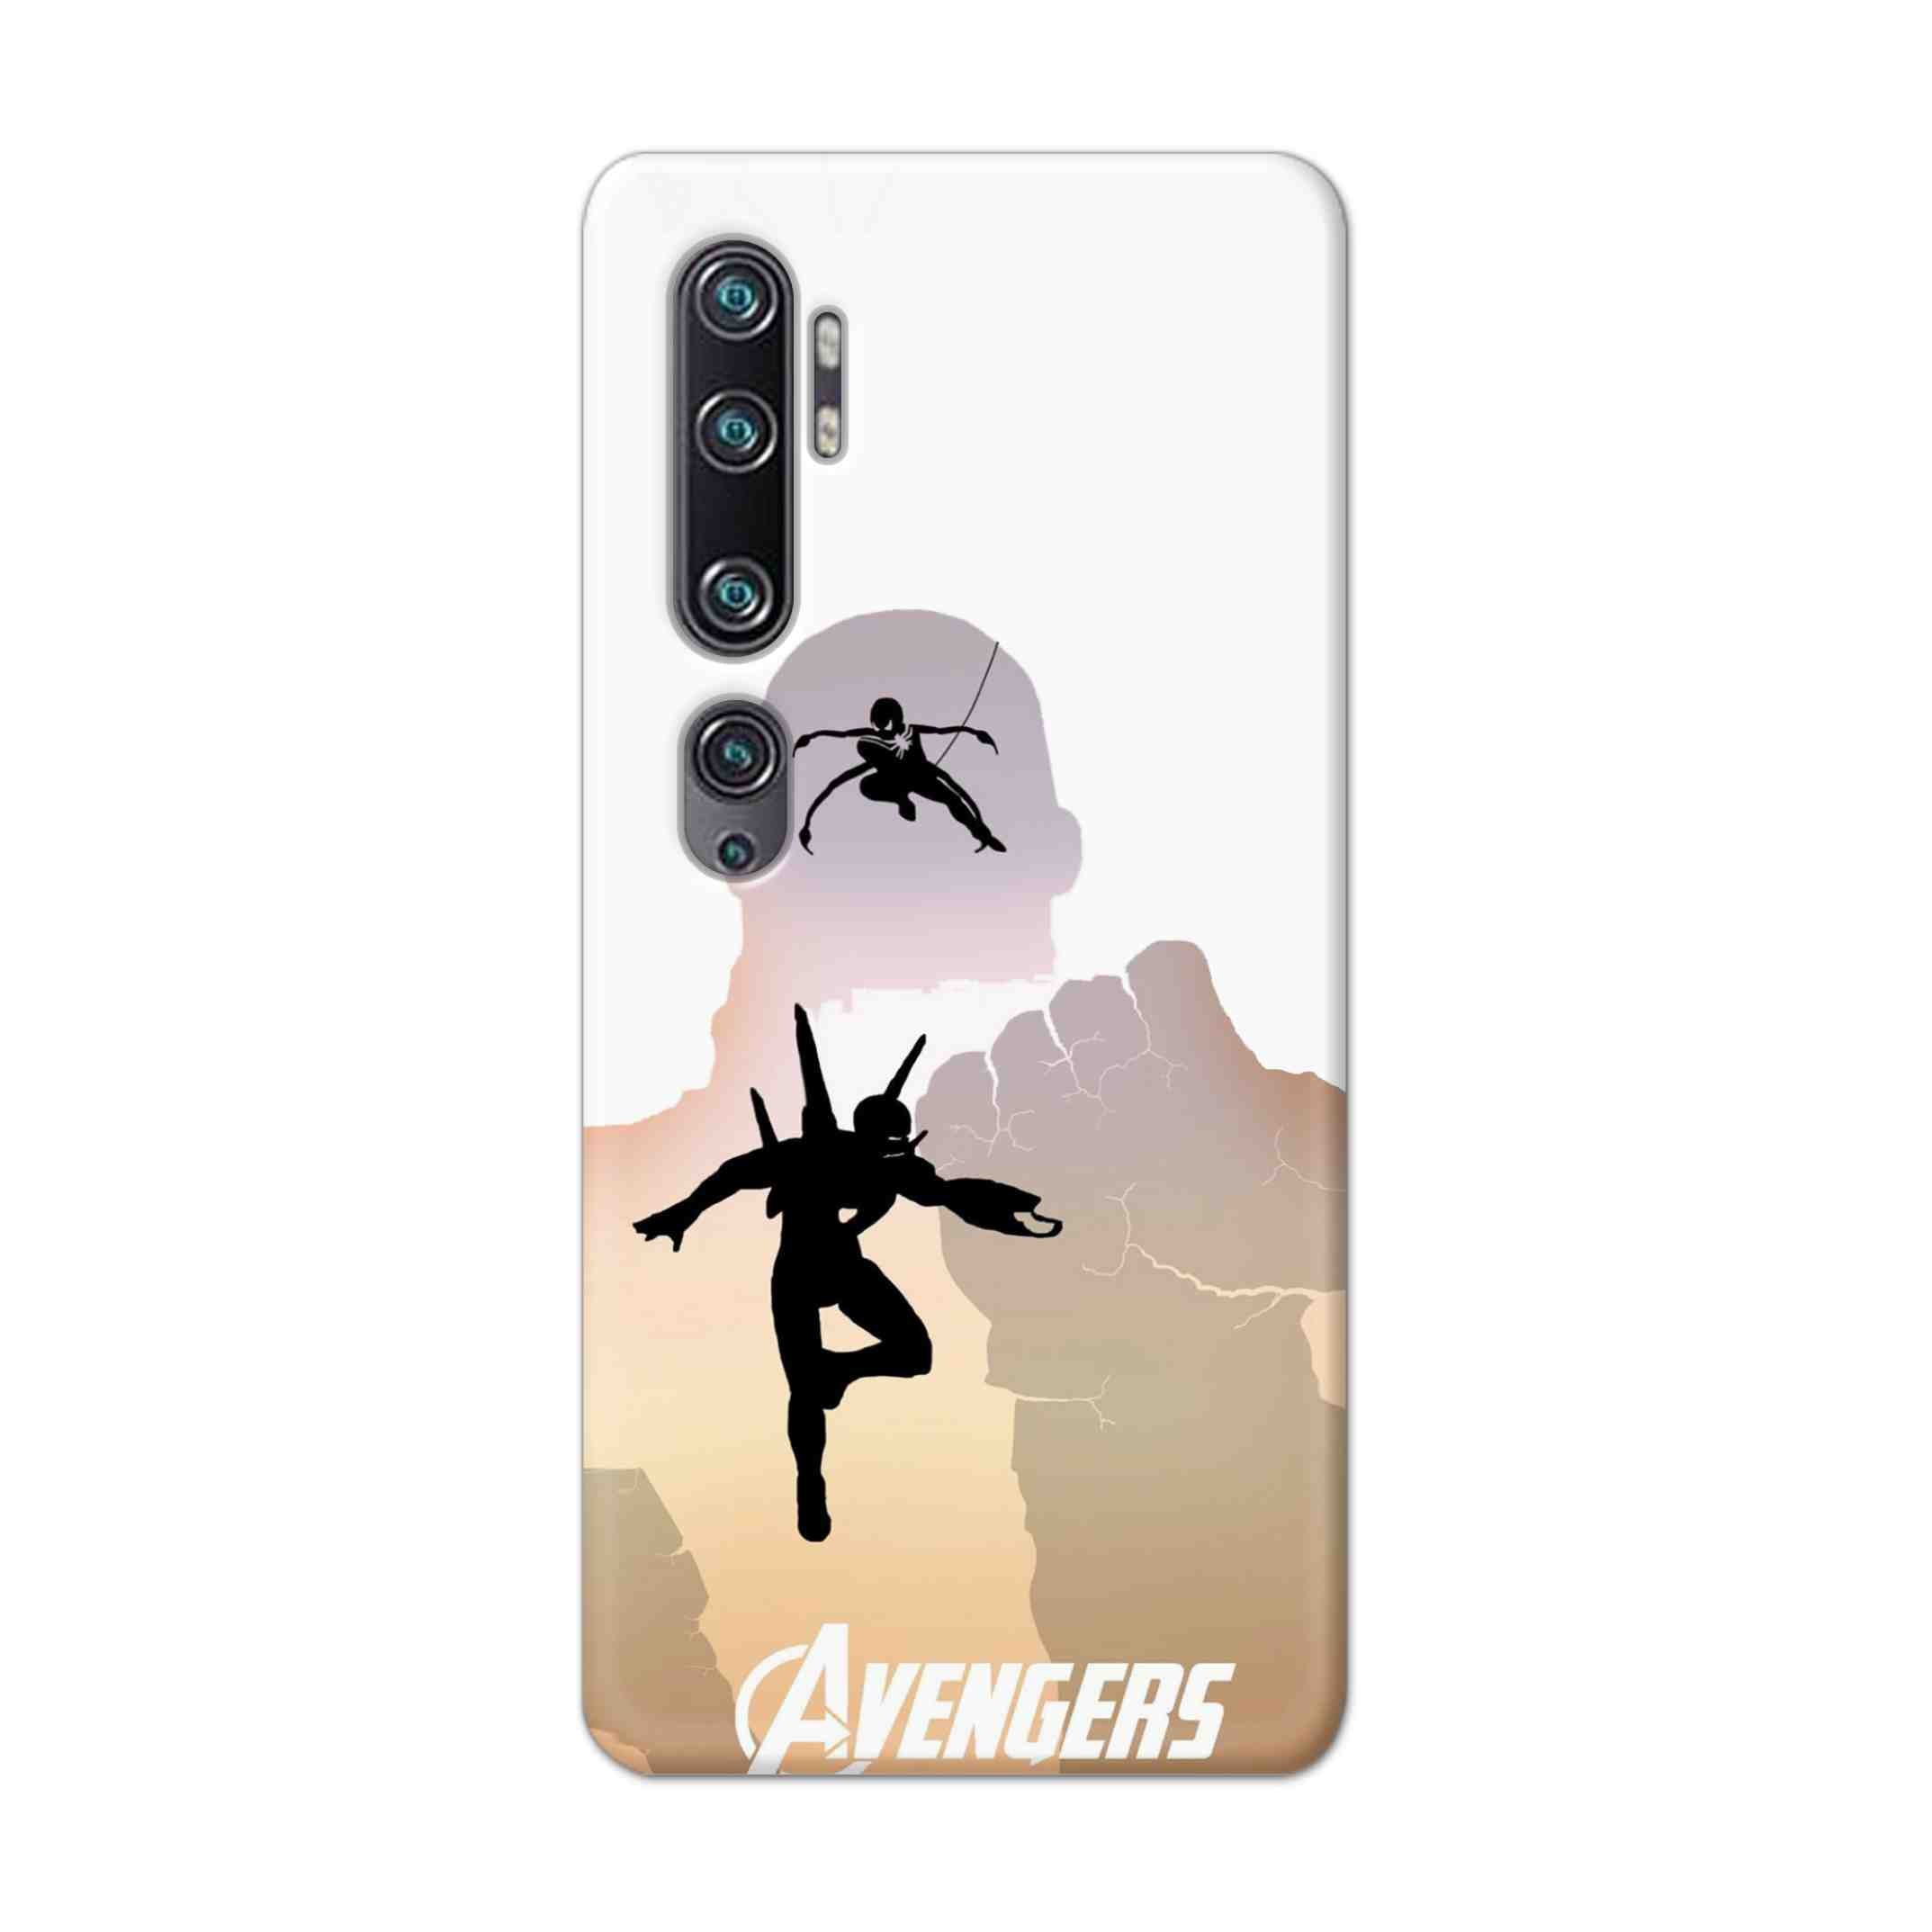 Buy Iron Man Vs Spiderman Hard Back Mobile Phone Case Cover For Xiaomi Mi Note 10 Online